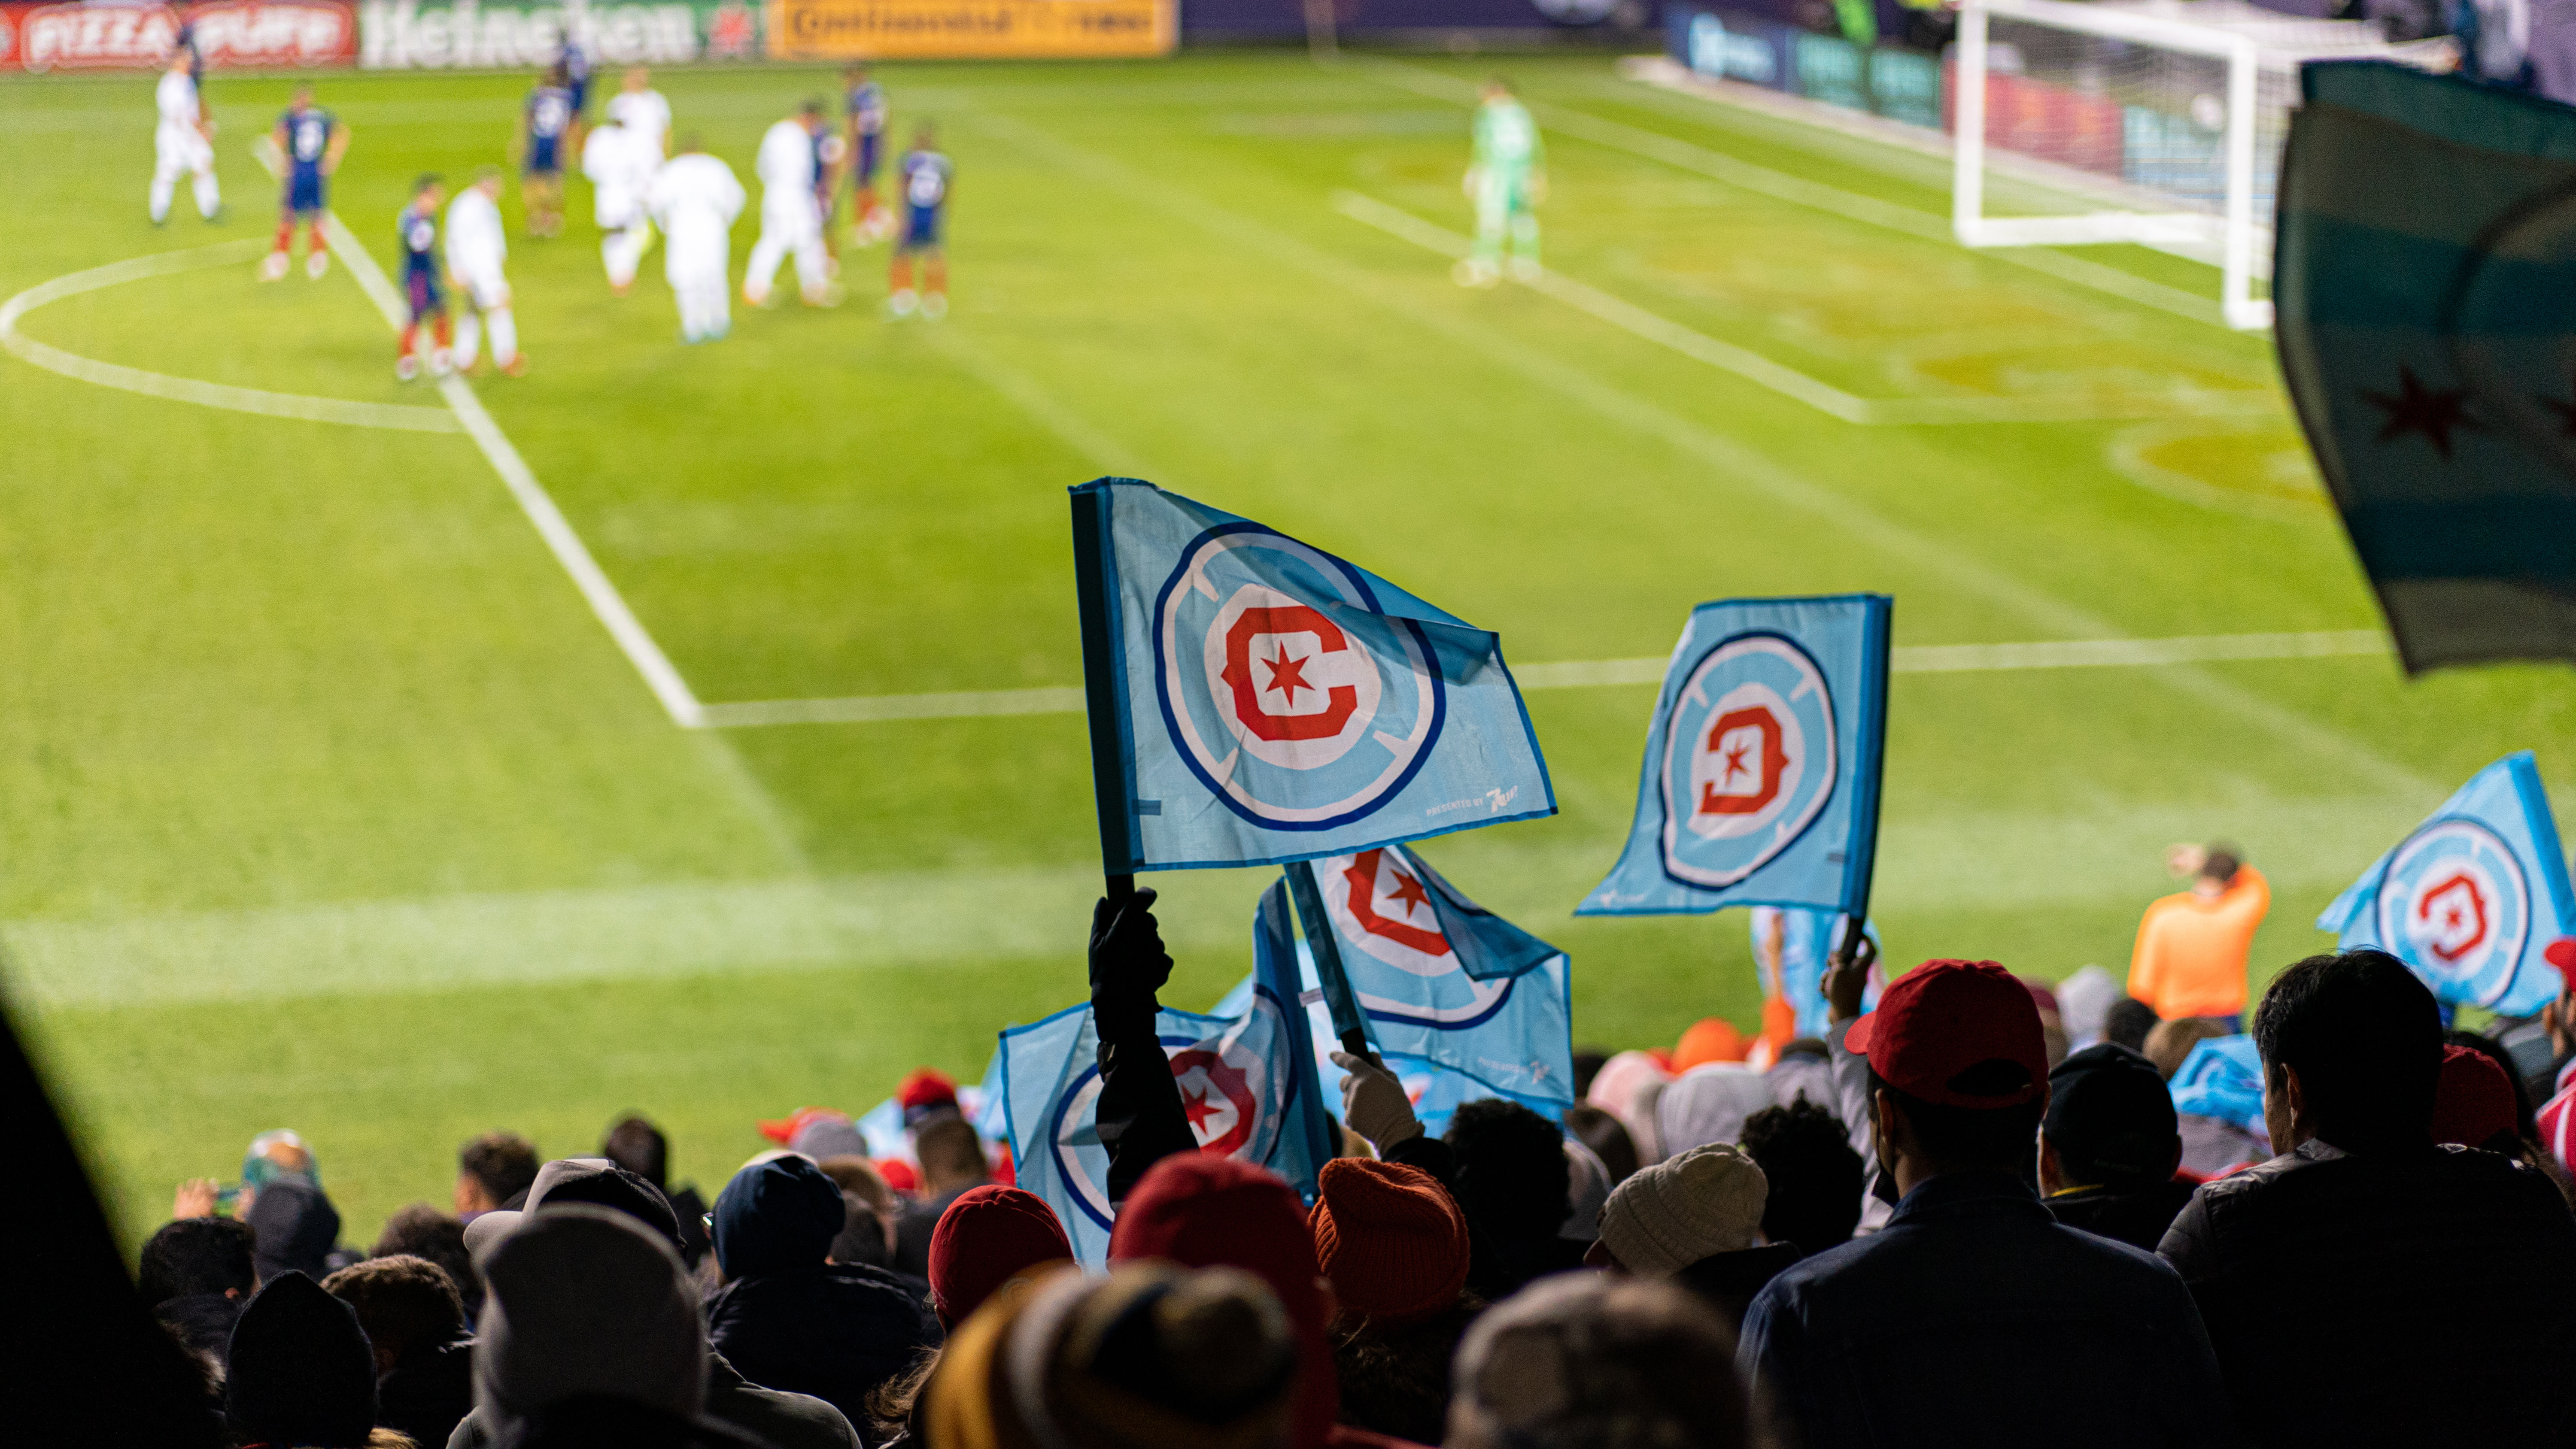 Mls Schedule 2022 Mls Announces 2022 Schedule Format & Conference Alignment | Chicago Fire Fc